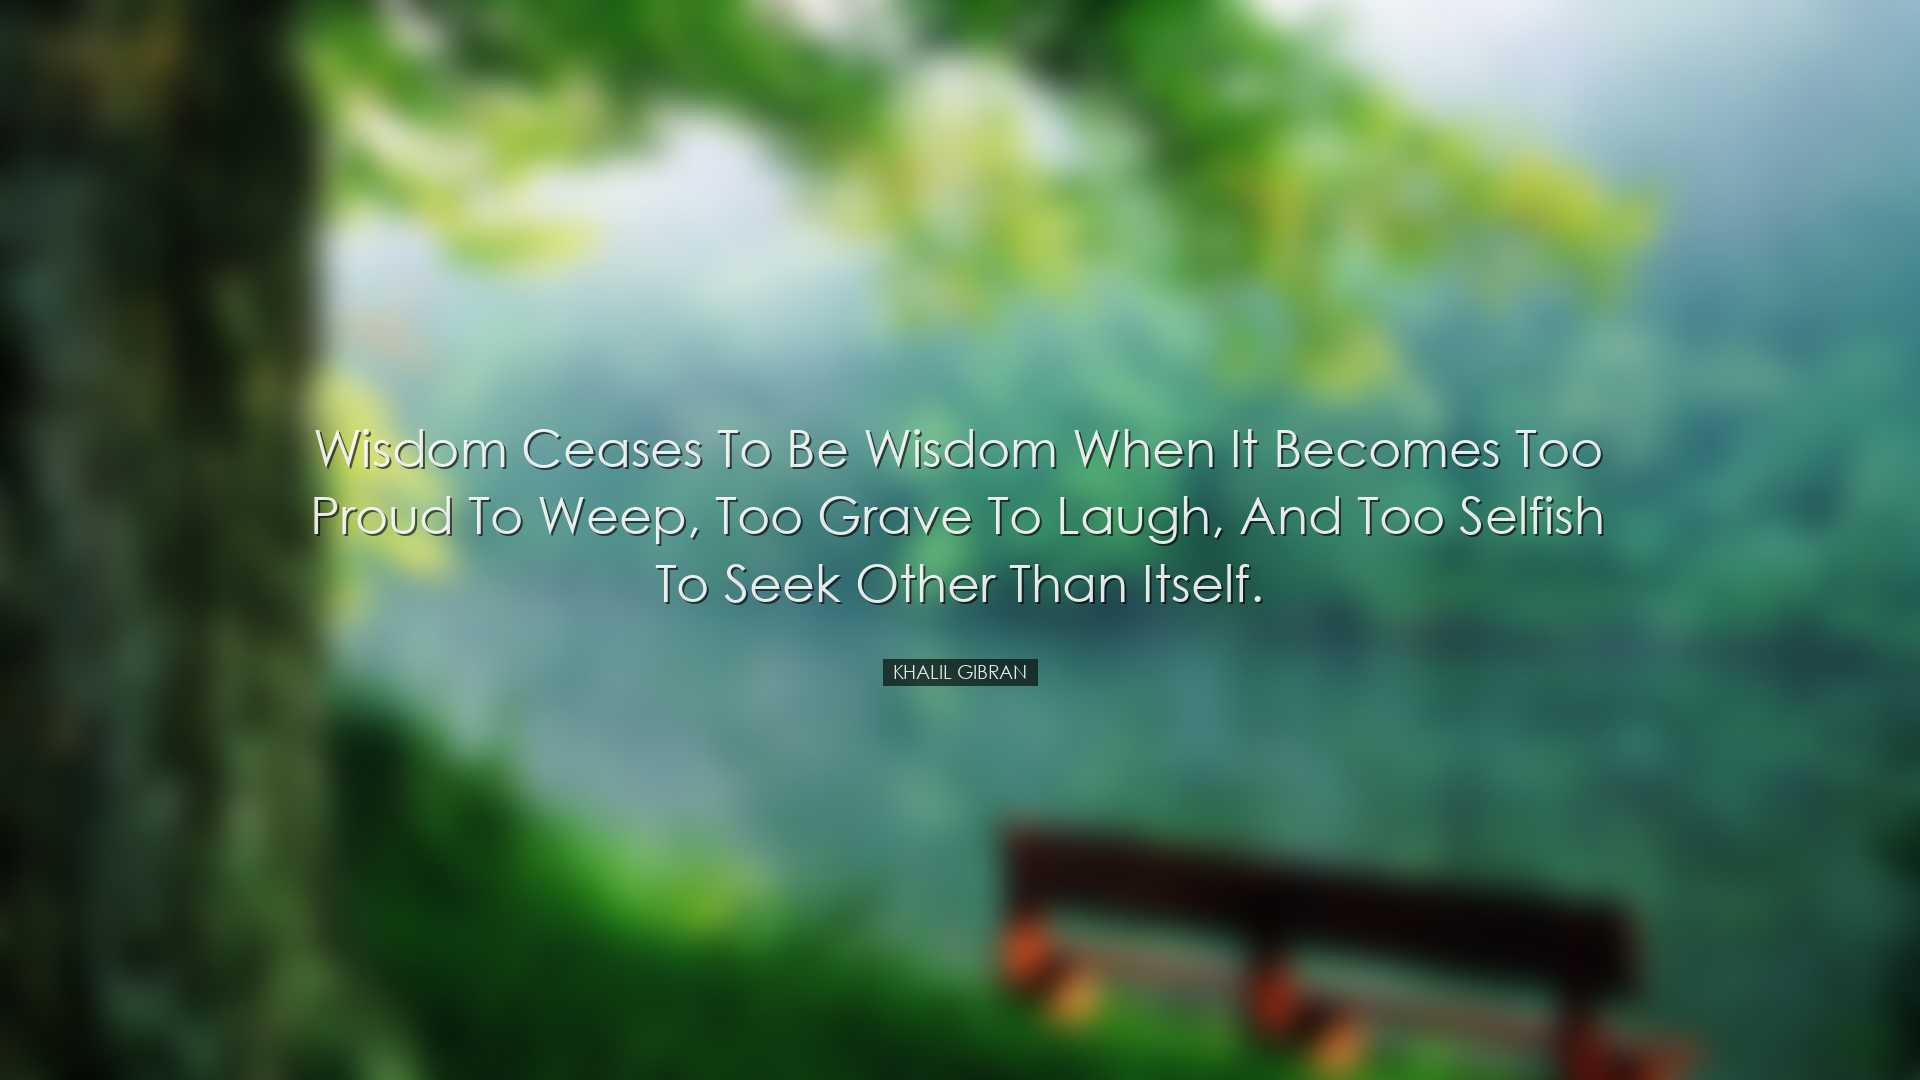 Wisdom ceases to be wisdom when it becomes too proud to weep, too